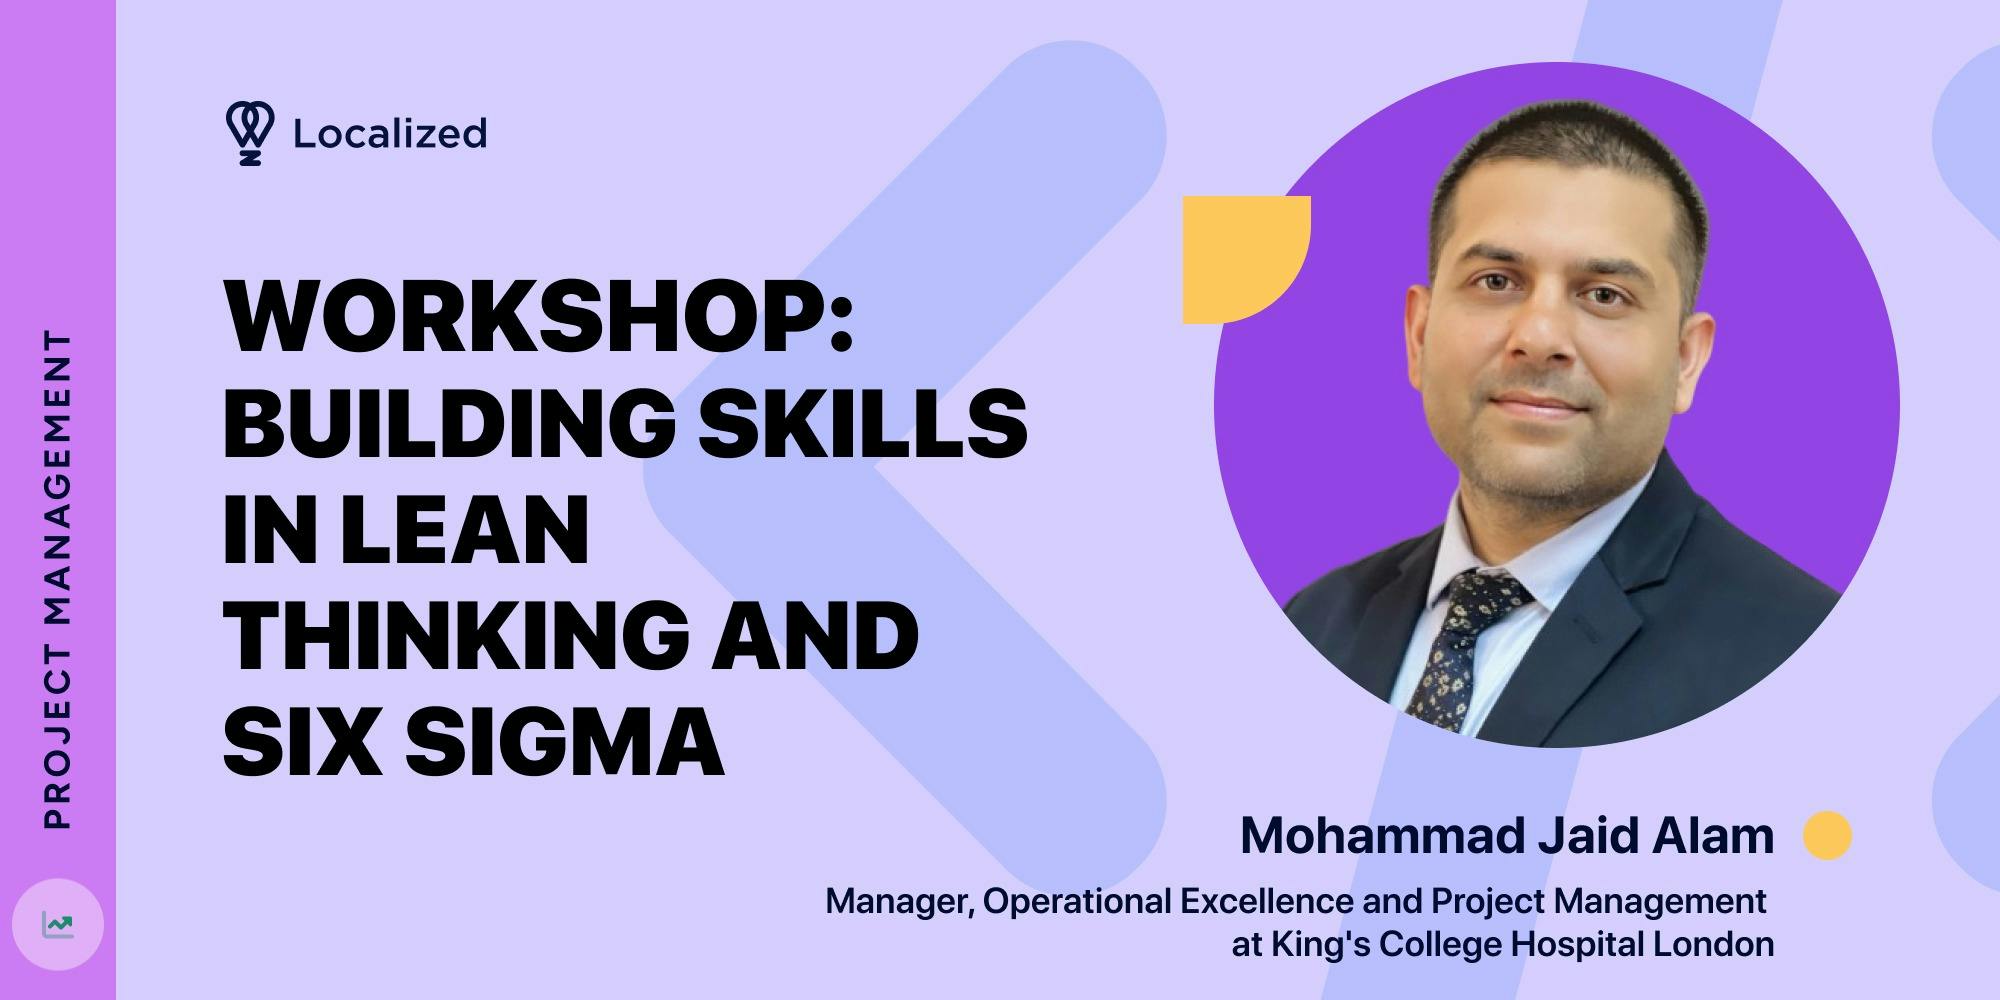 Workshop: Building Skills in Lean Thinking and Six Sigma